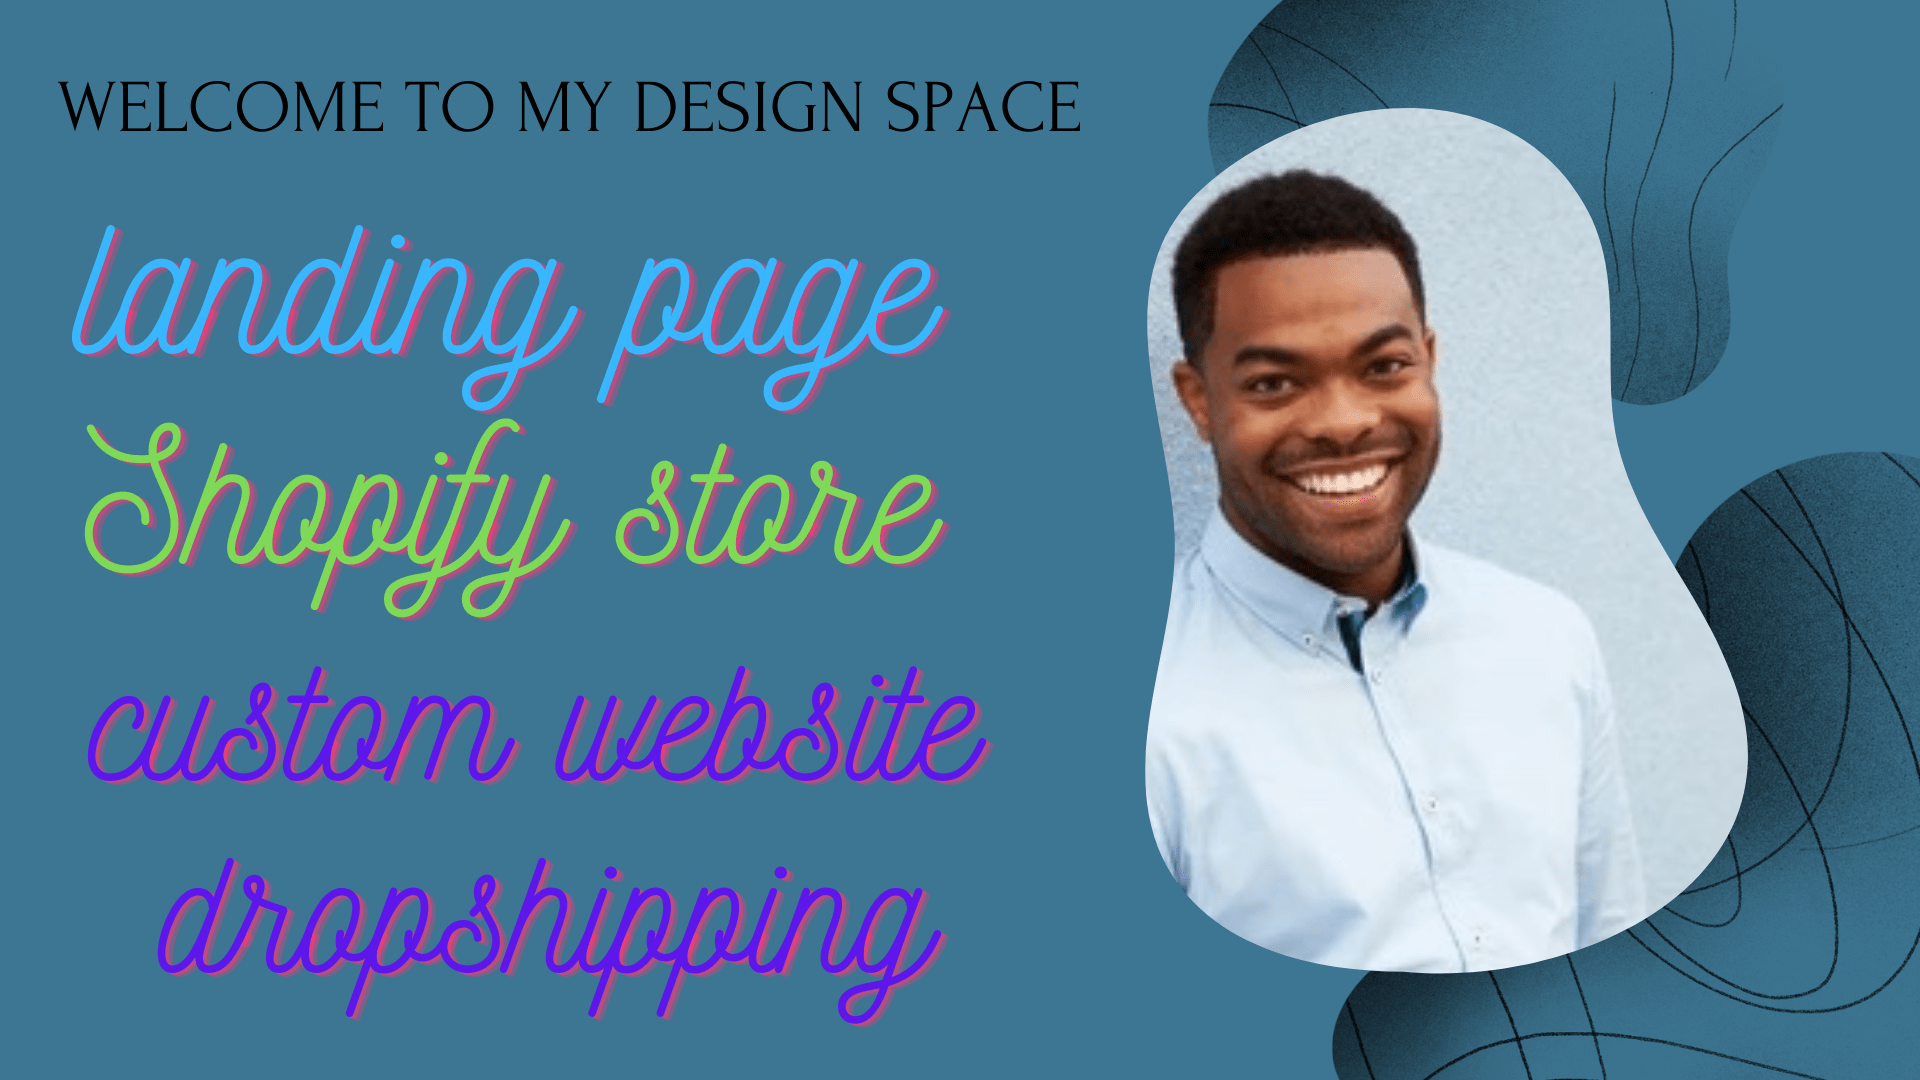 I will design shopify store or landing page with zipify gempages or shogun, FiverrBox